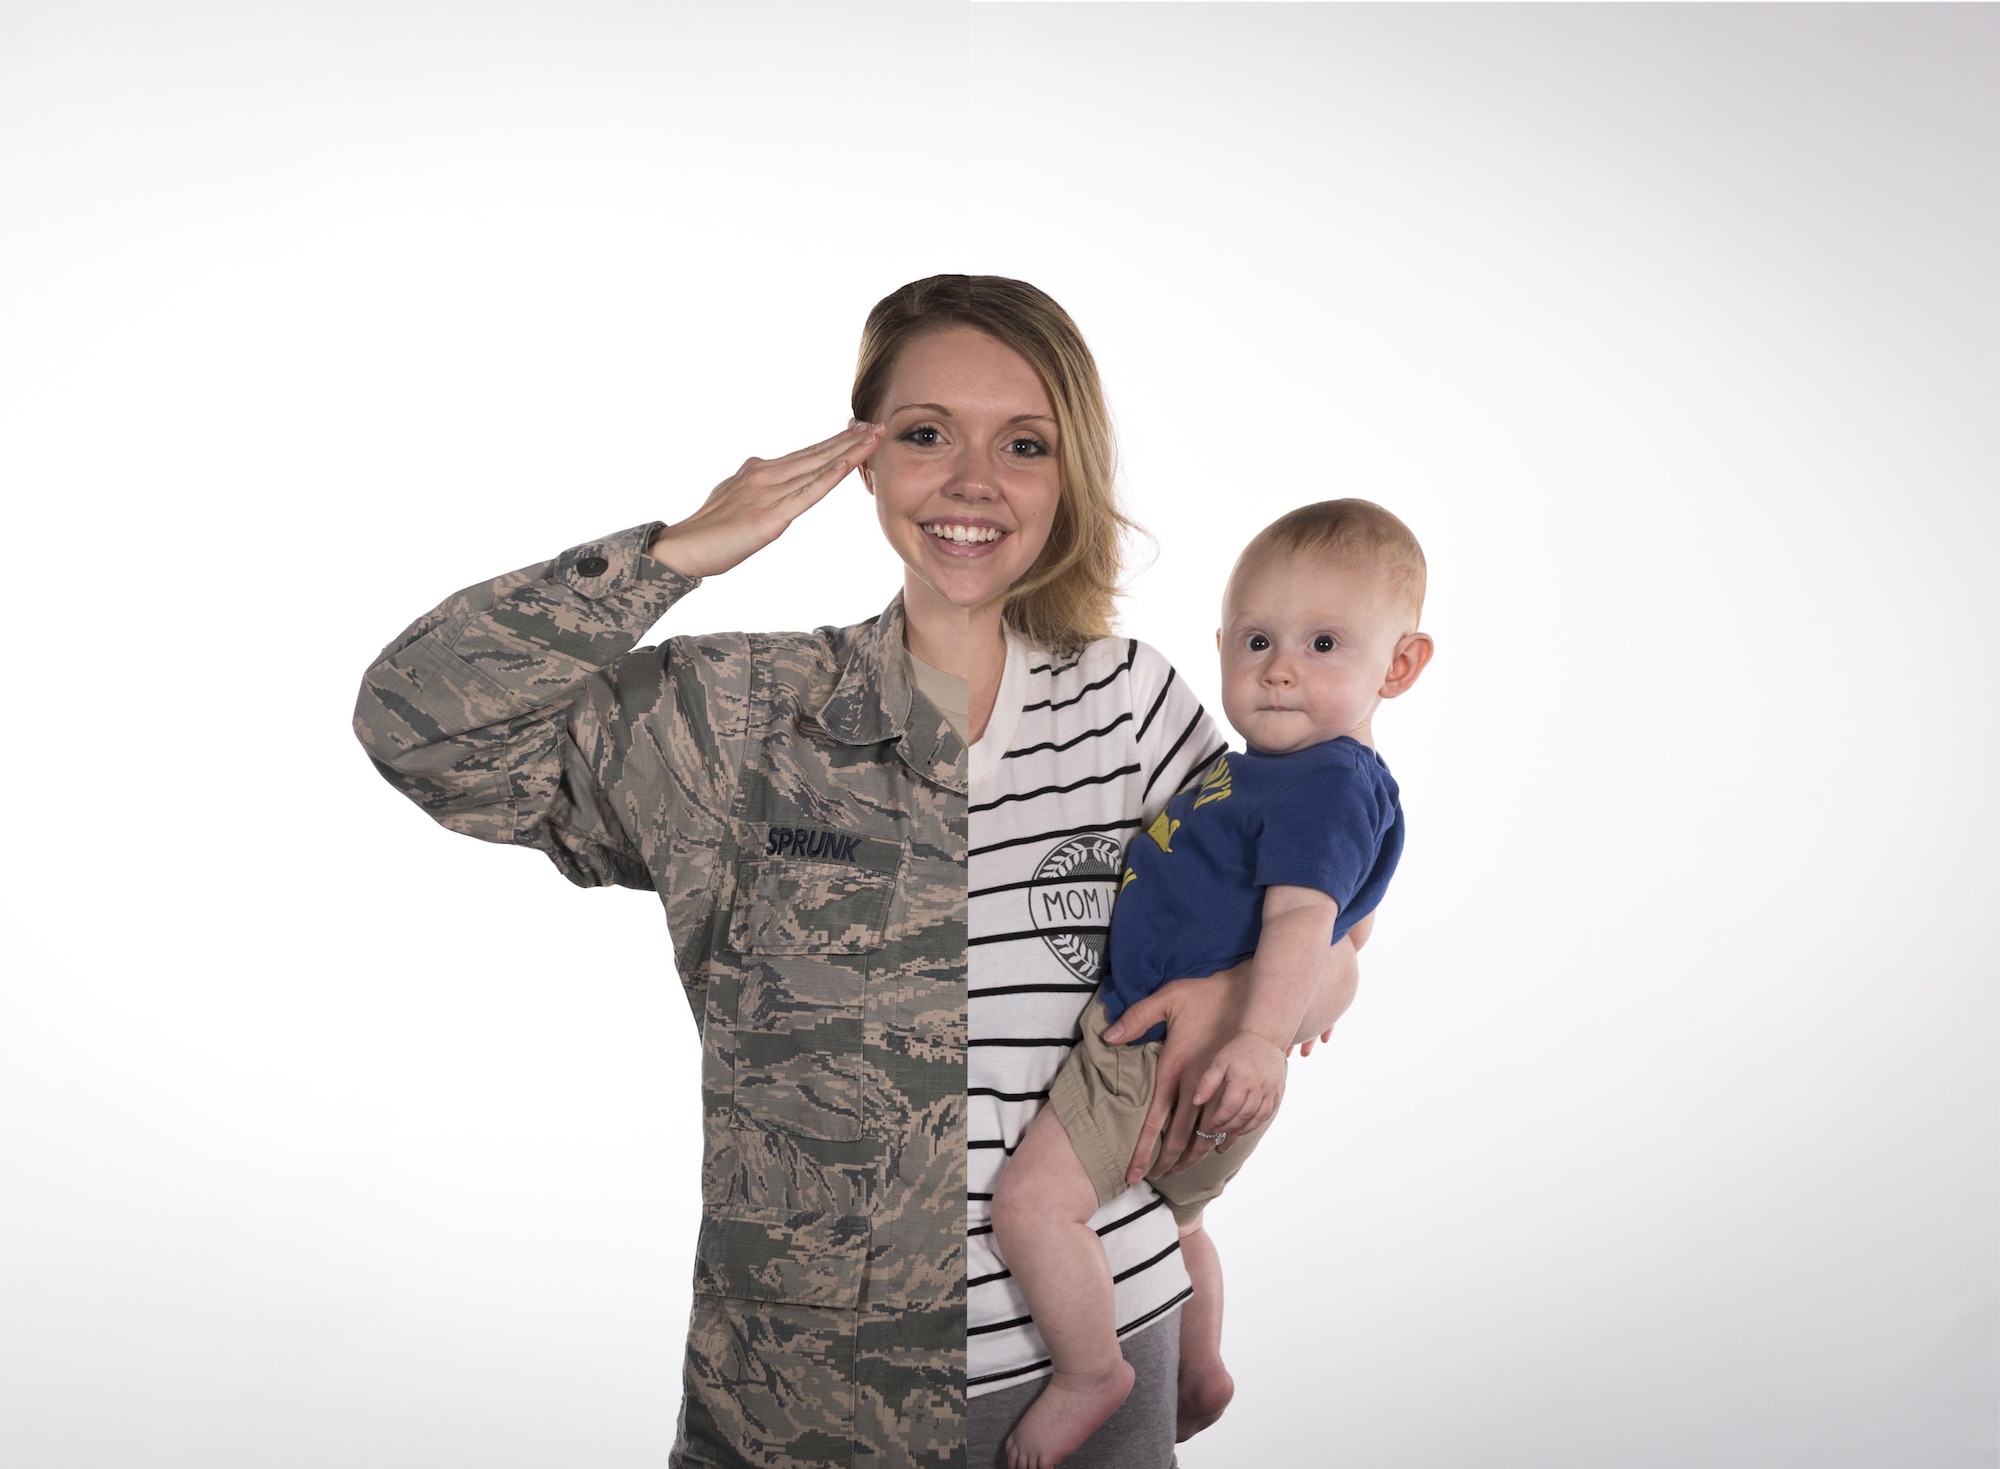 Airman 1st Class Lauren Sprunk, 23d Wing photojournalist, and her son, Jayce, pose for a photo illustration, May 11, 2017, at Moody Air Force Base, Ga., in honor of mothers who serve in the military. (U.S. Air Force photo illustration by Airman 1st Class Lauren M. Sprunk and Senior Airman Janiqua Robinson)